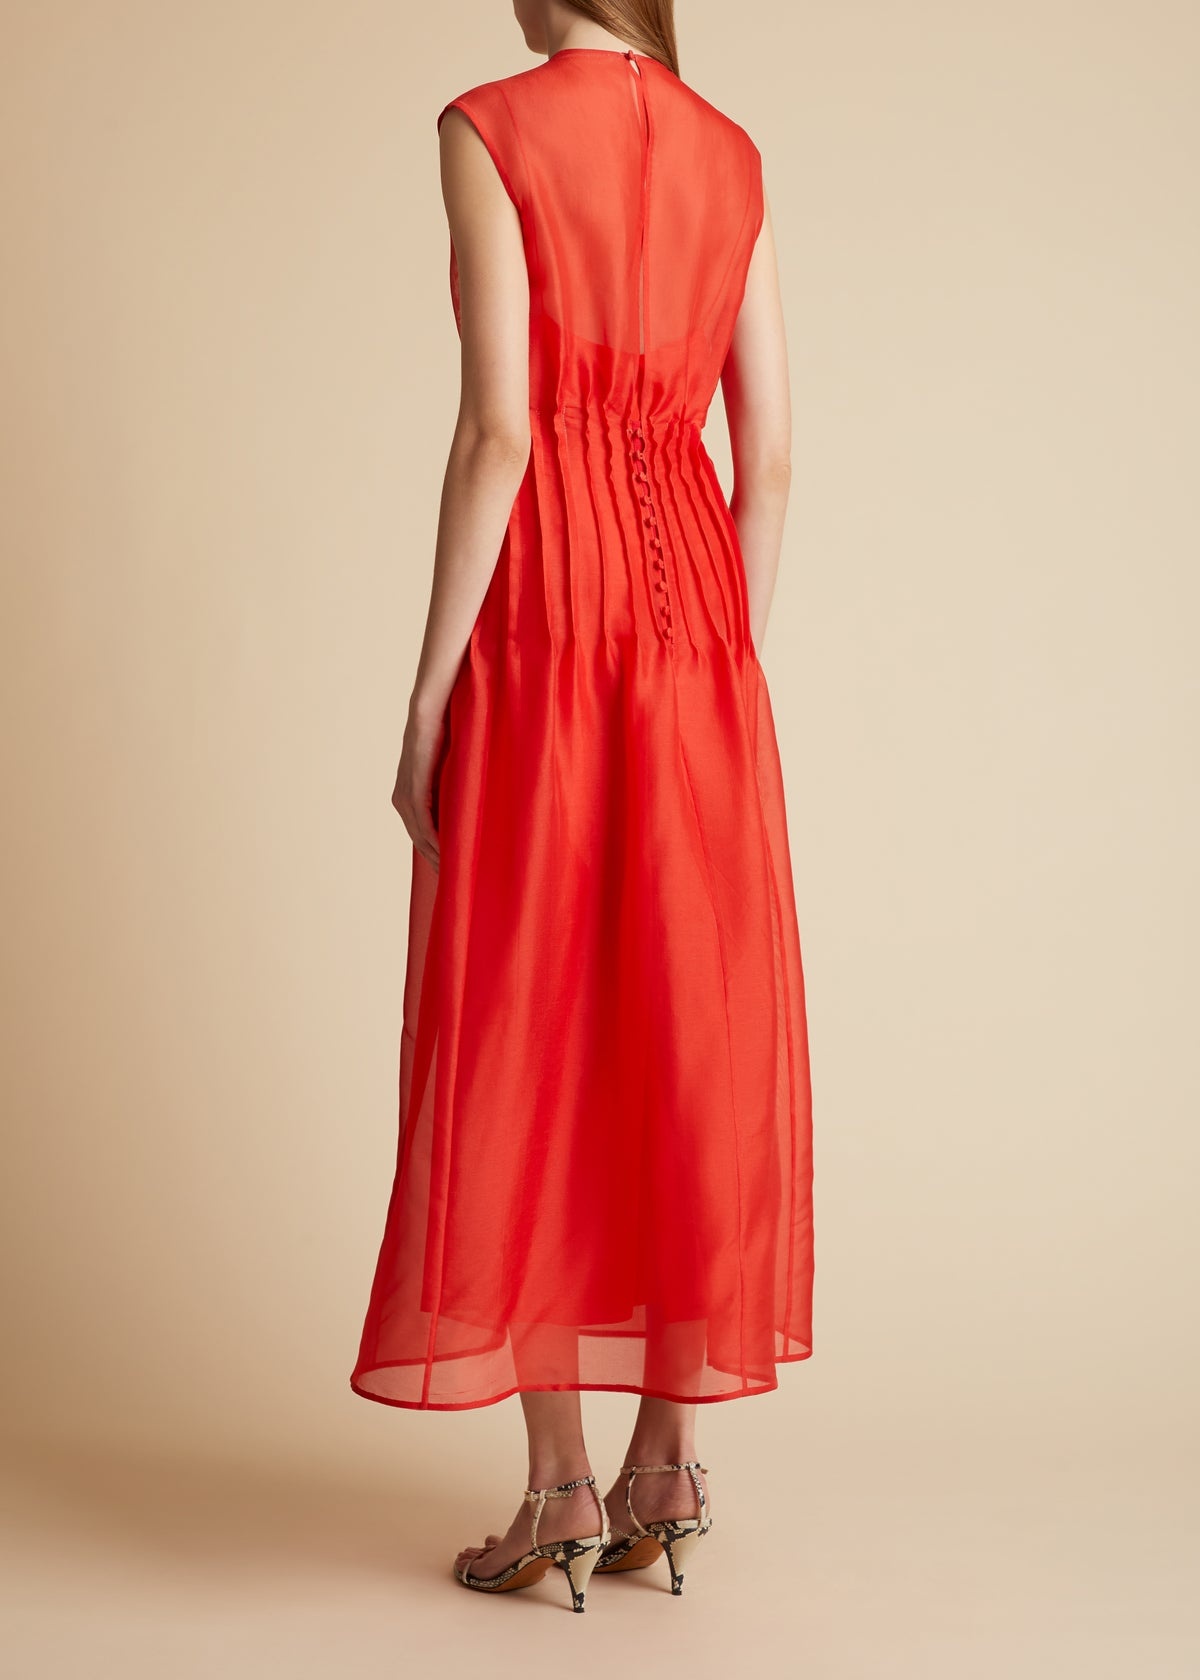 The Wes Dress in Fire Red - 3